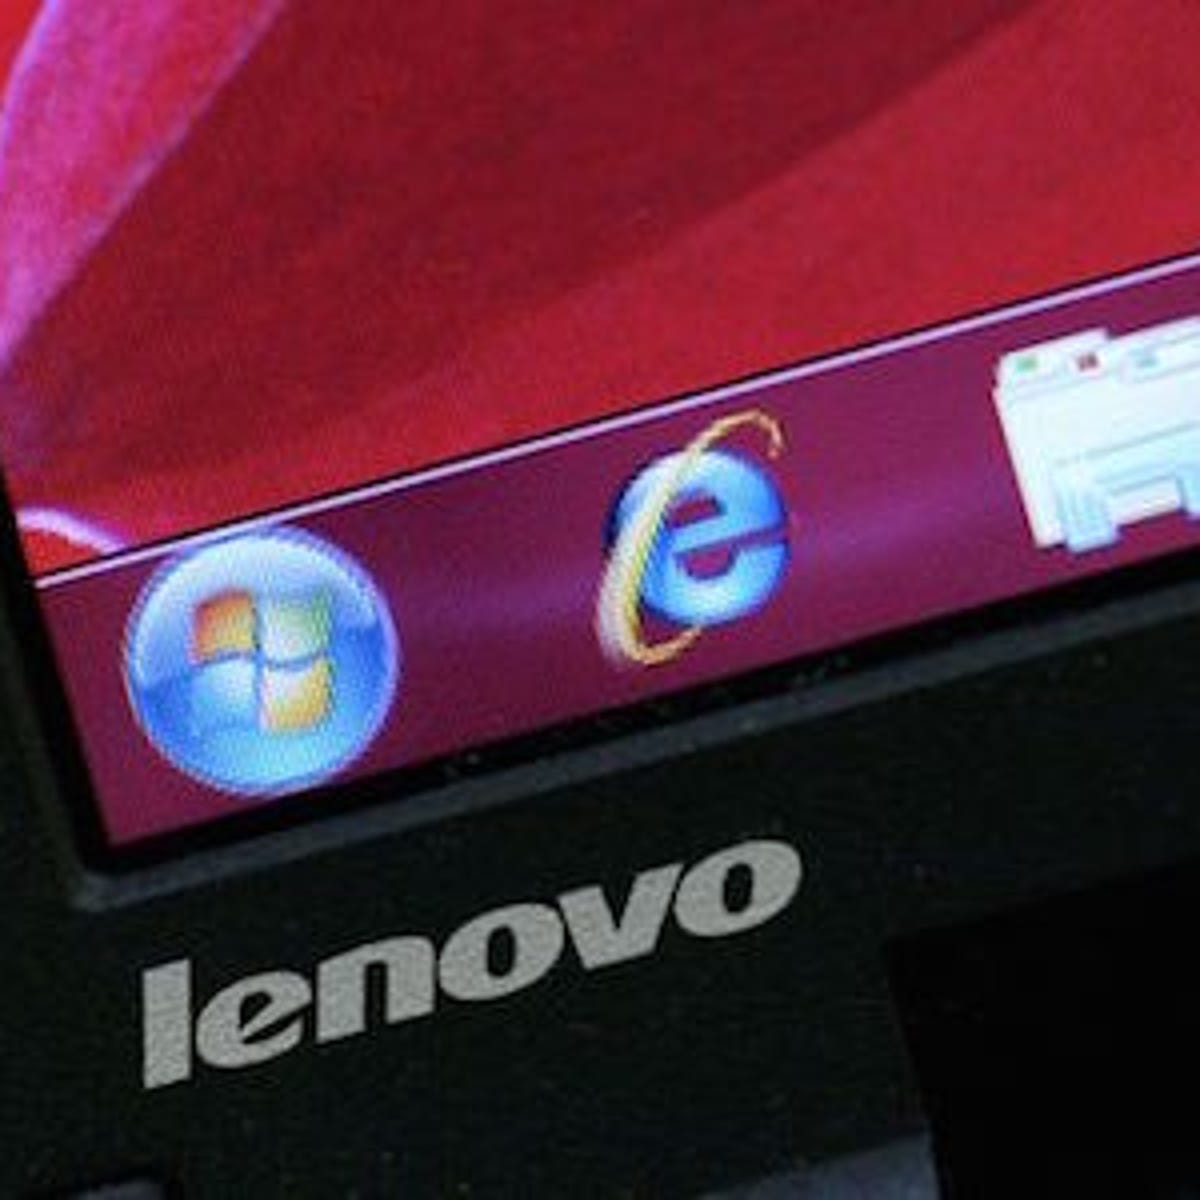 Lenovo Shipping PCs with Pre-Installed 'Superfish Malware' that